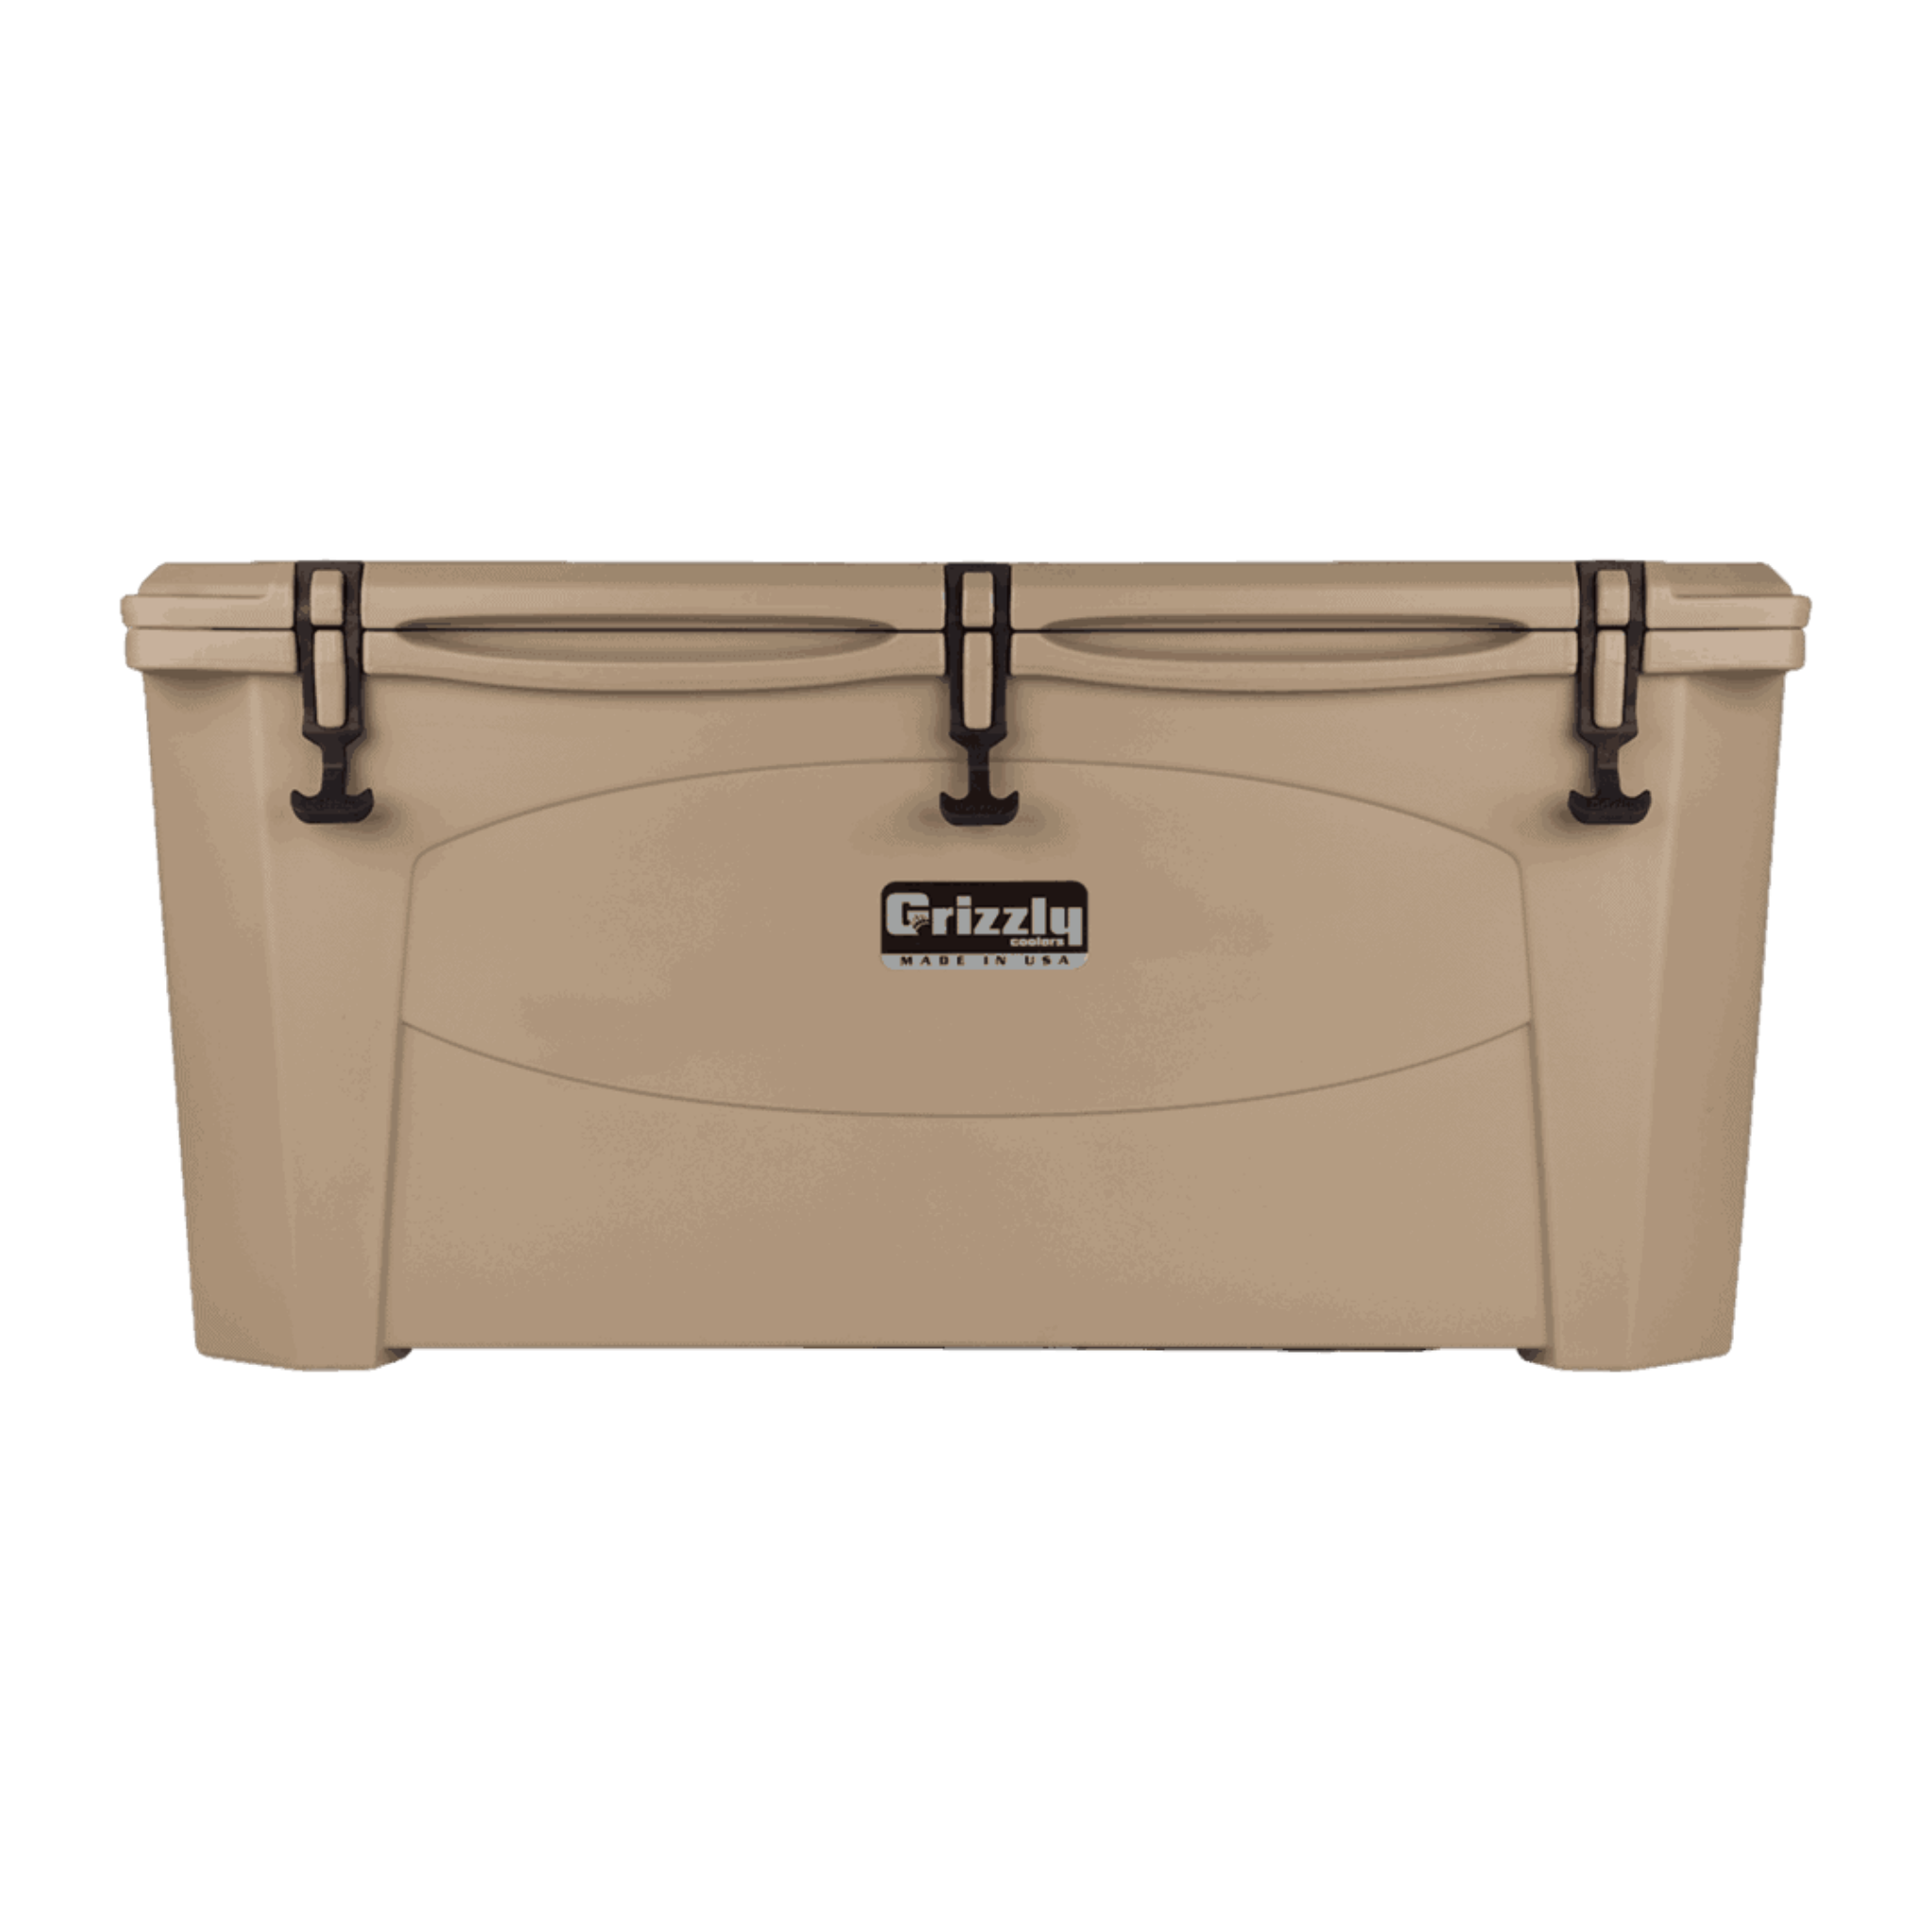 Grizzly Coolers | 165 Quart Cooler